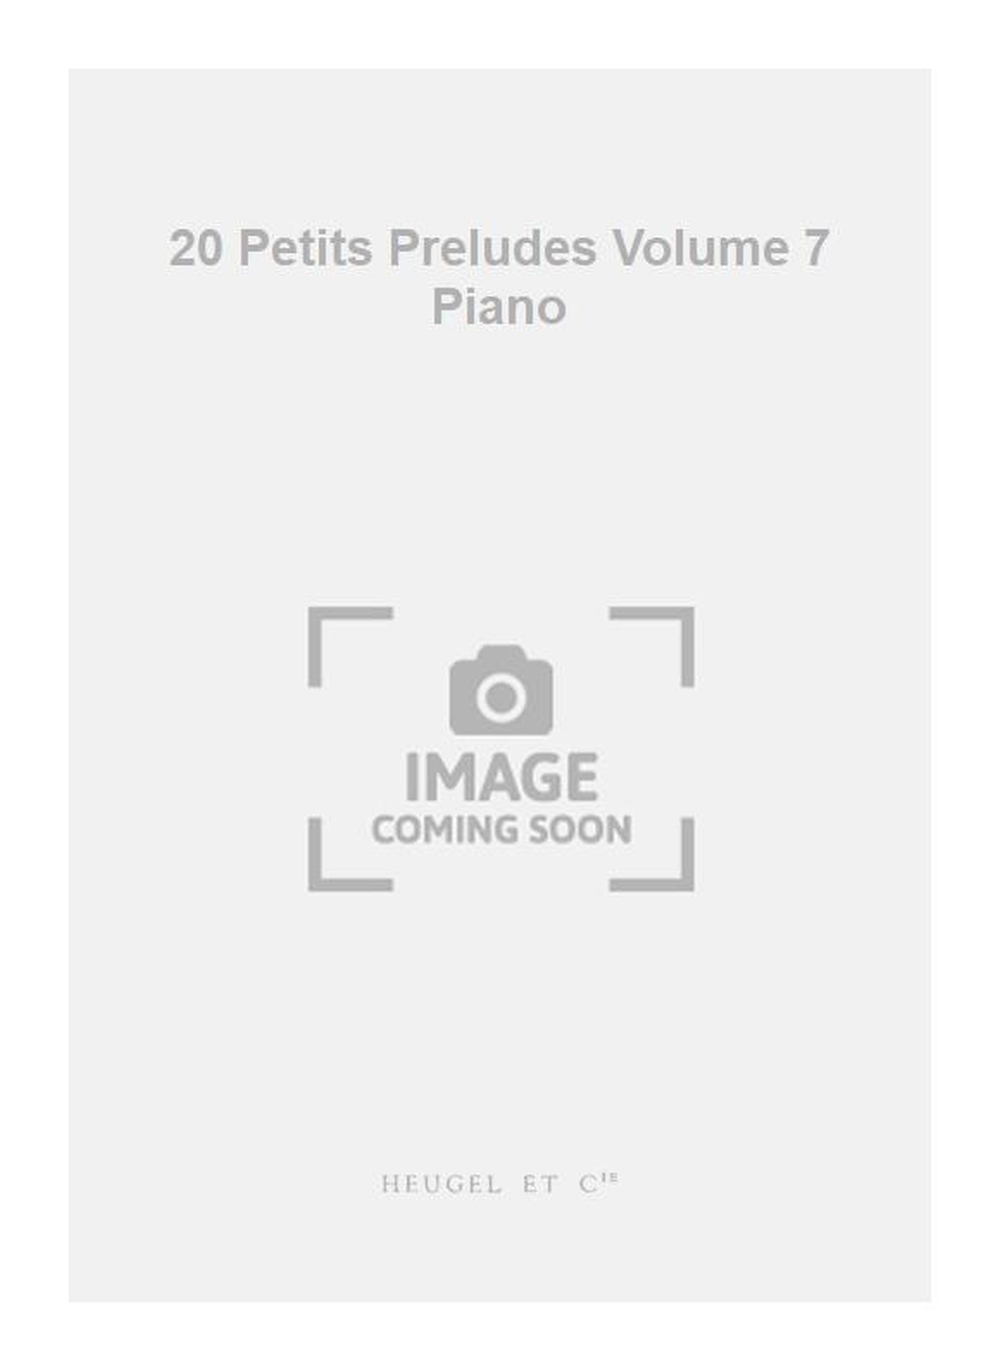 Georges Bull: 20 Petits Preludes Volume 7 Piano